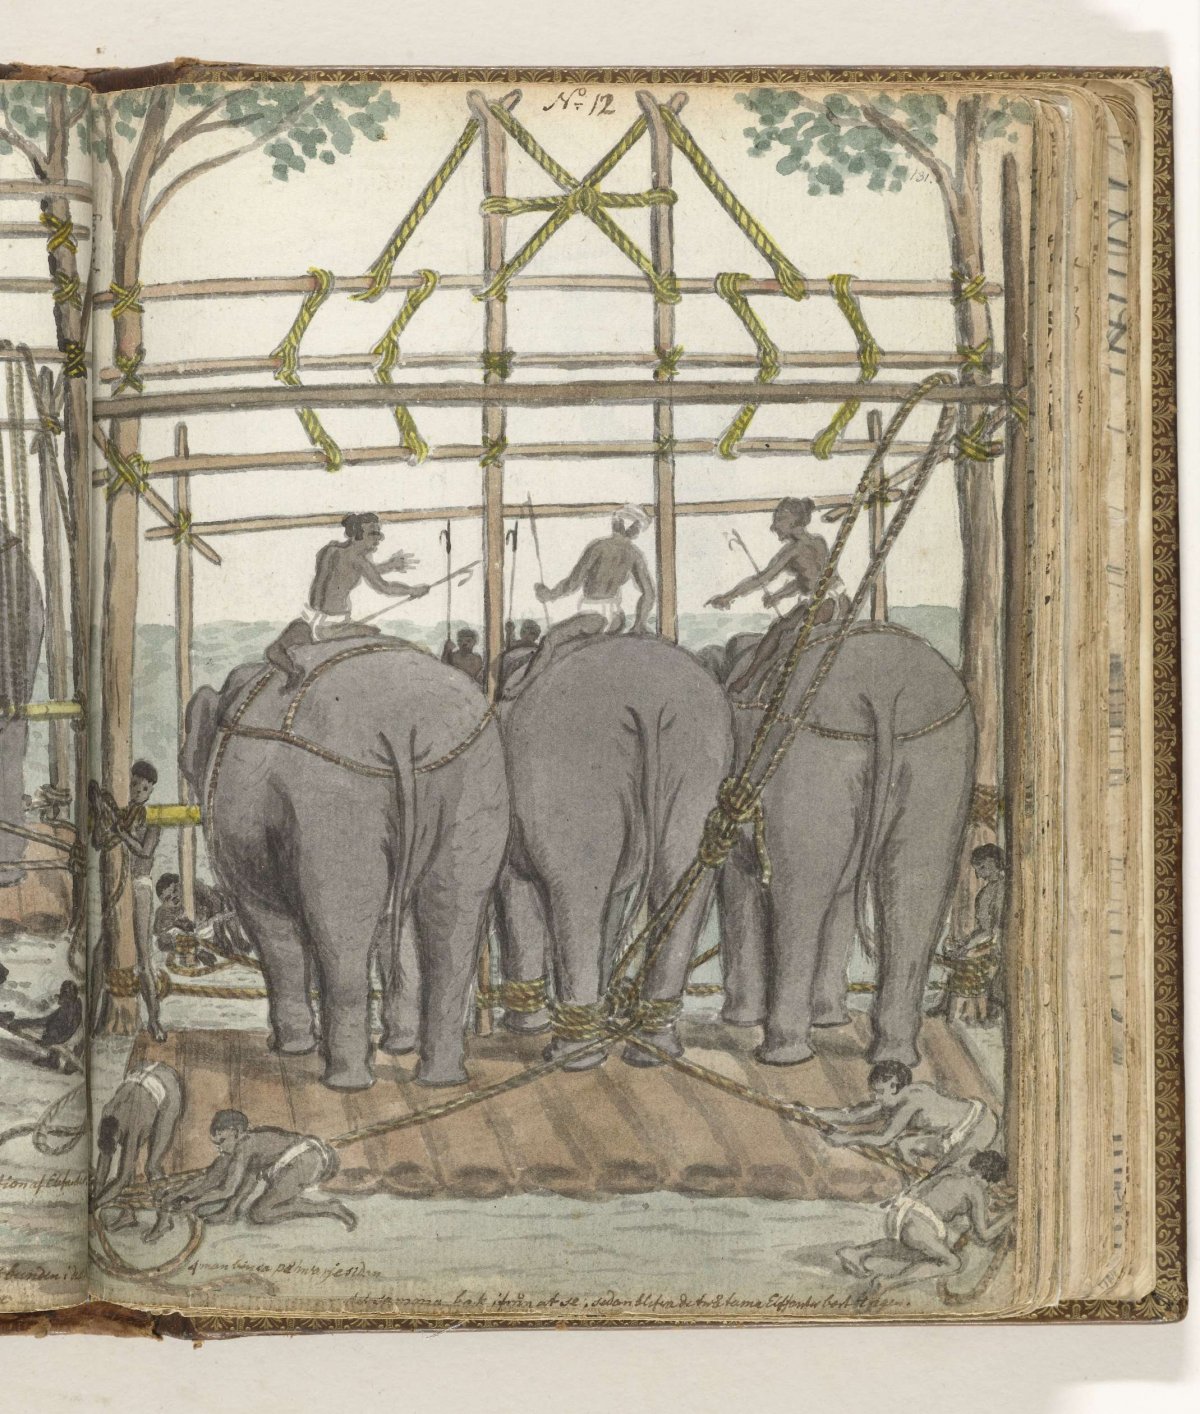 Taming a Wild Elephant in the Temporary Stable, rear view, Jan Brandes, 1785